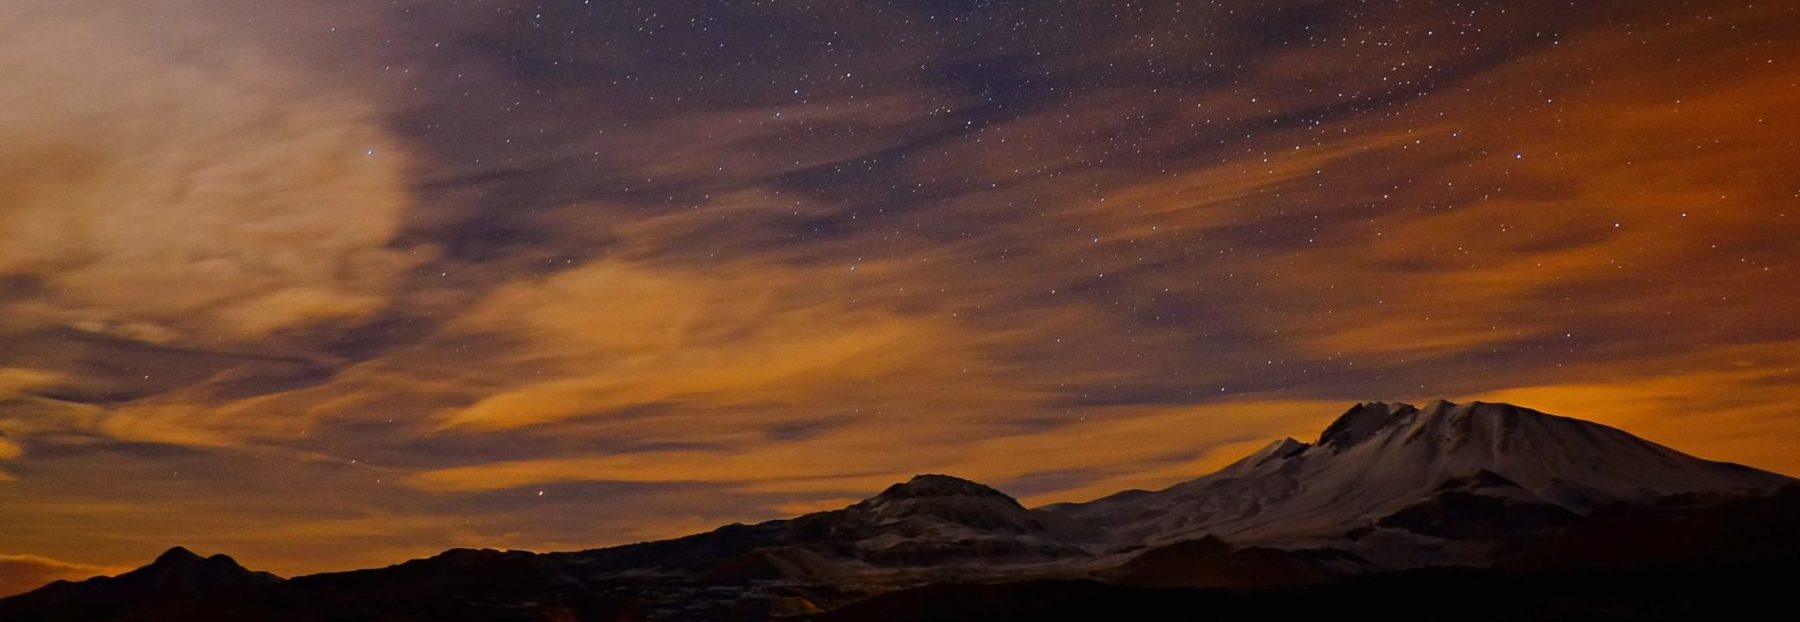 An image of mountains and a night sky